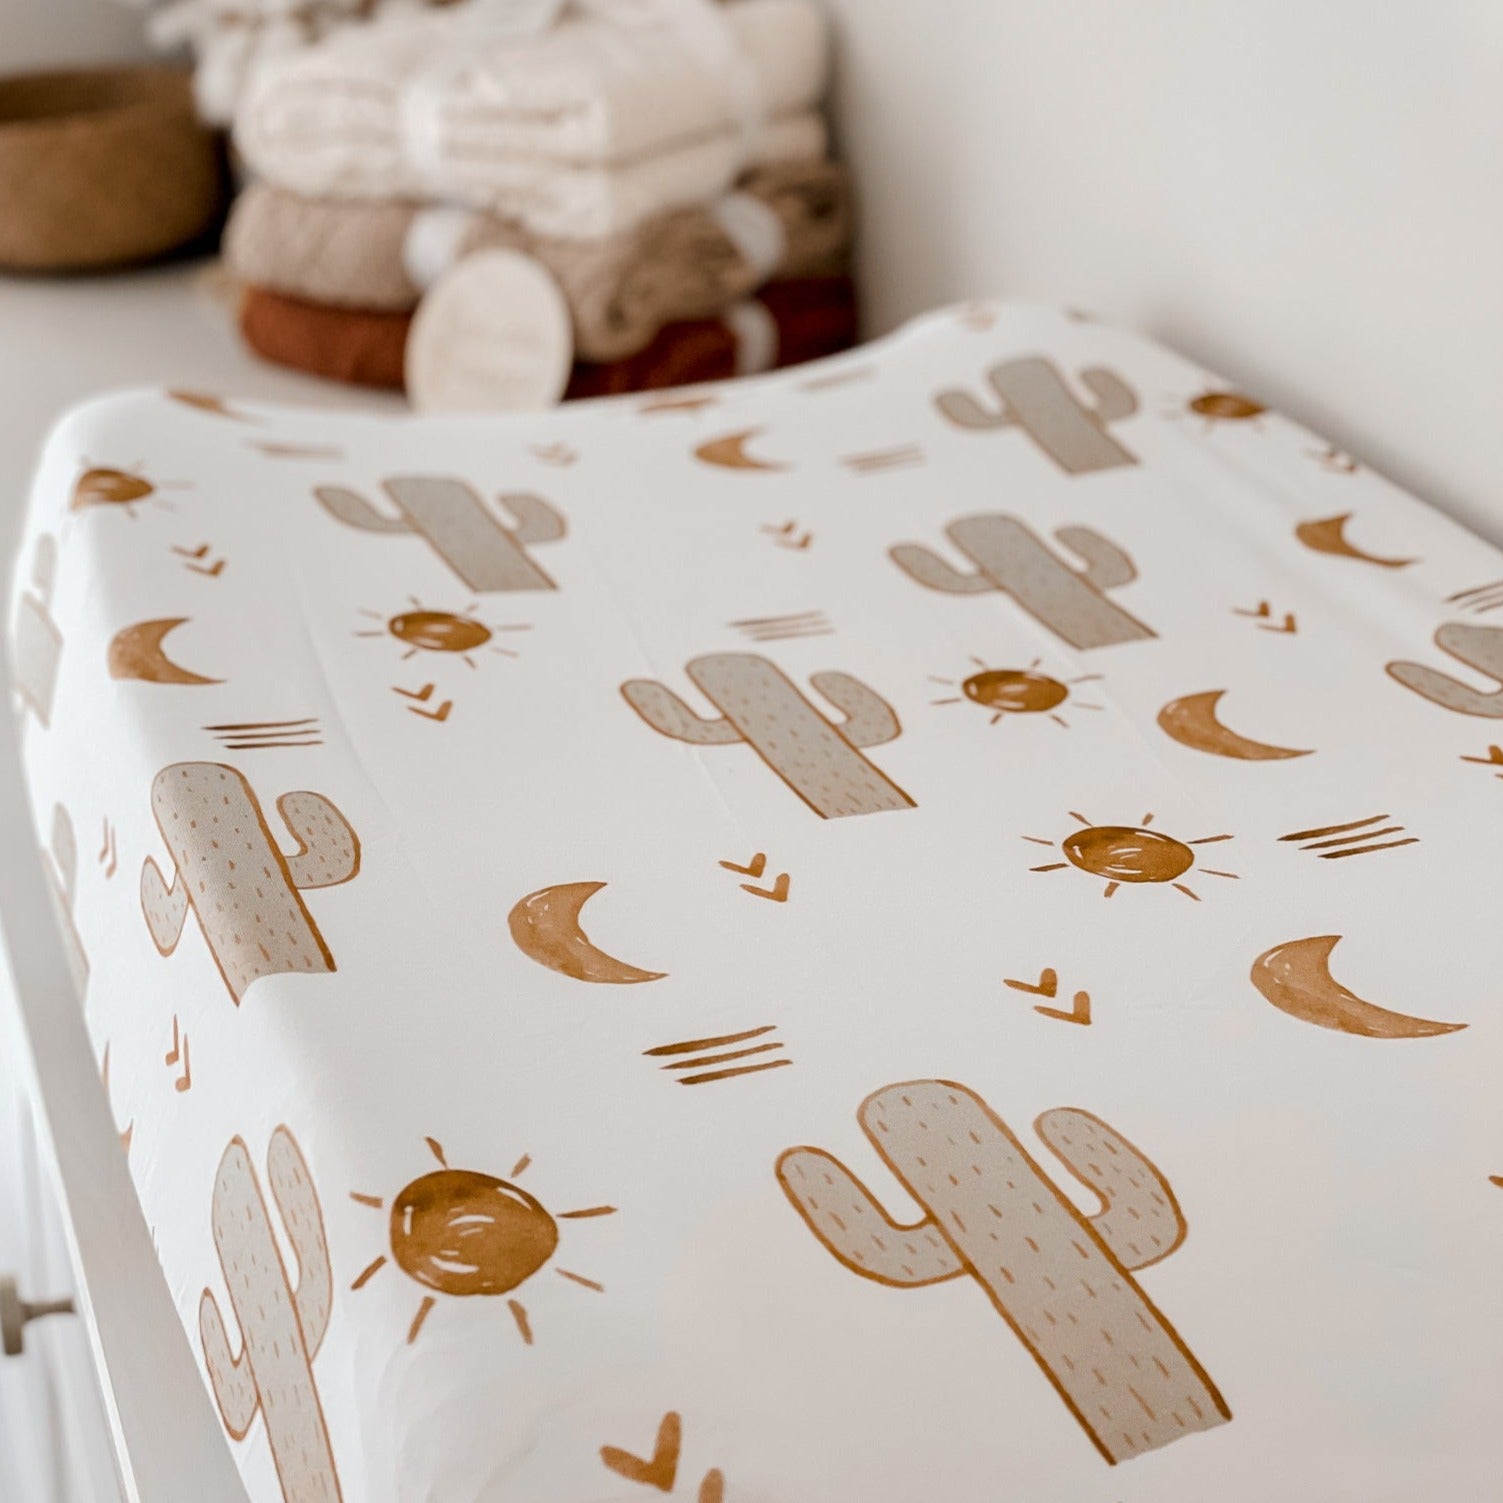 Organic Cotton Bassinet Sheet Set: Brown Moons, Suns, and Green Cactuses Print, Includes Matching Change Pad Cover